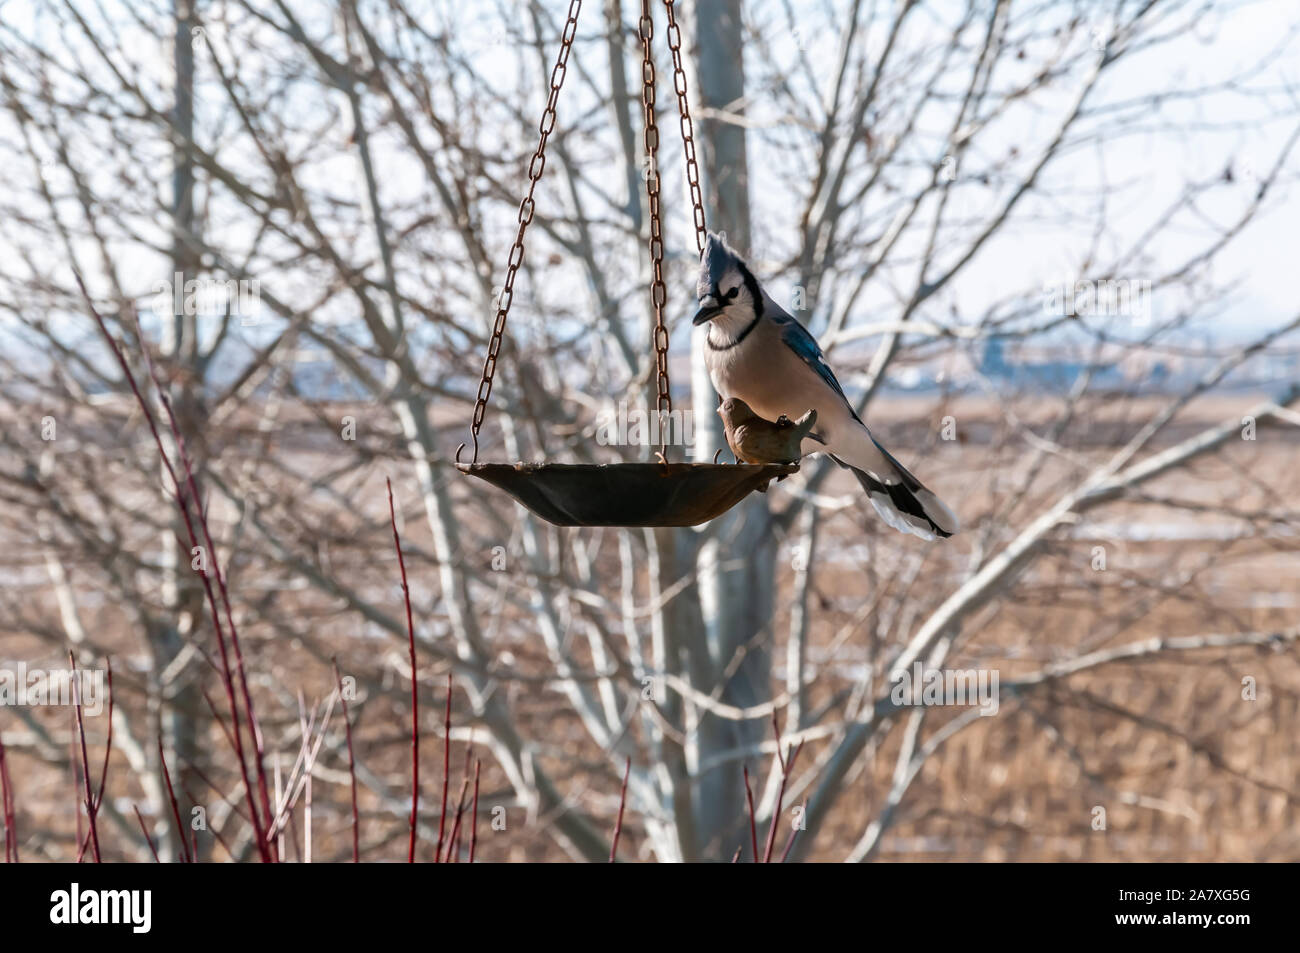 Cautious Blue Jay ready to eat out of the bird feeder Stock Photo